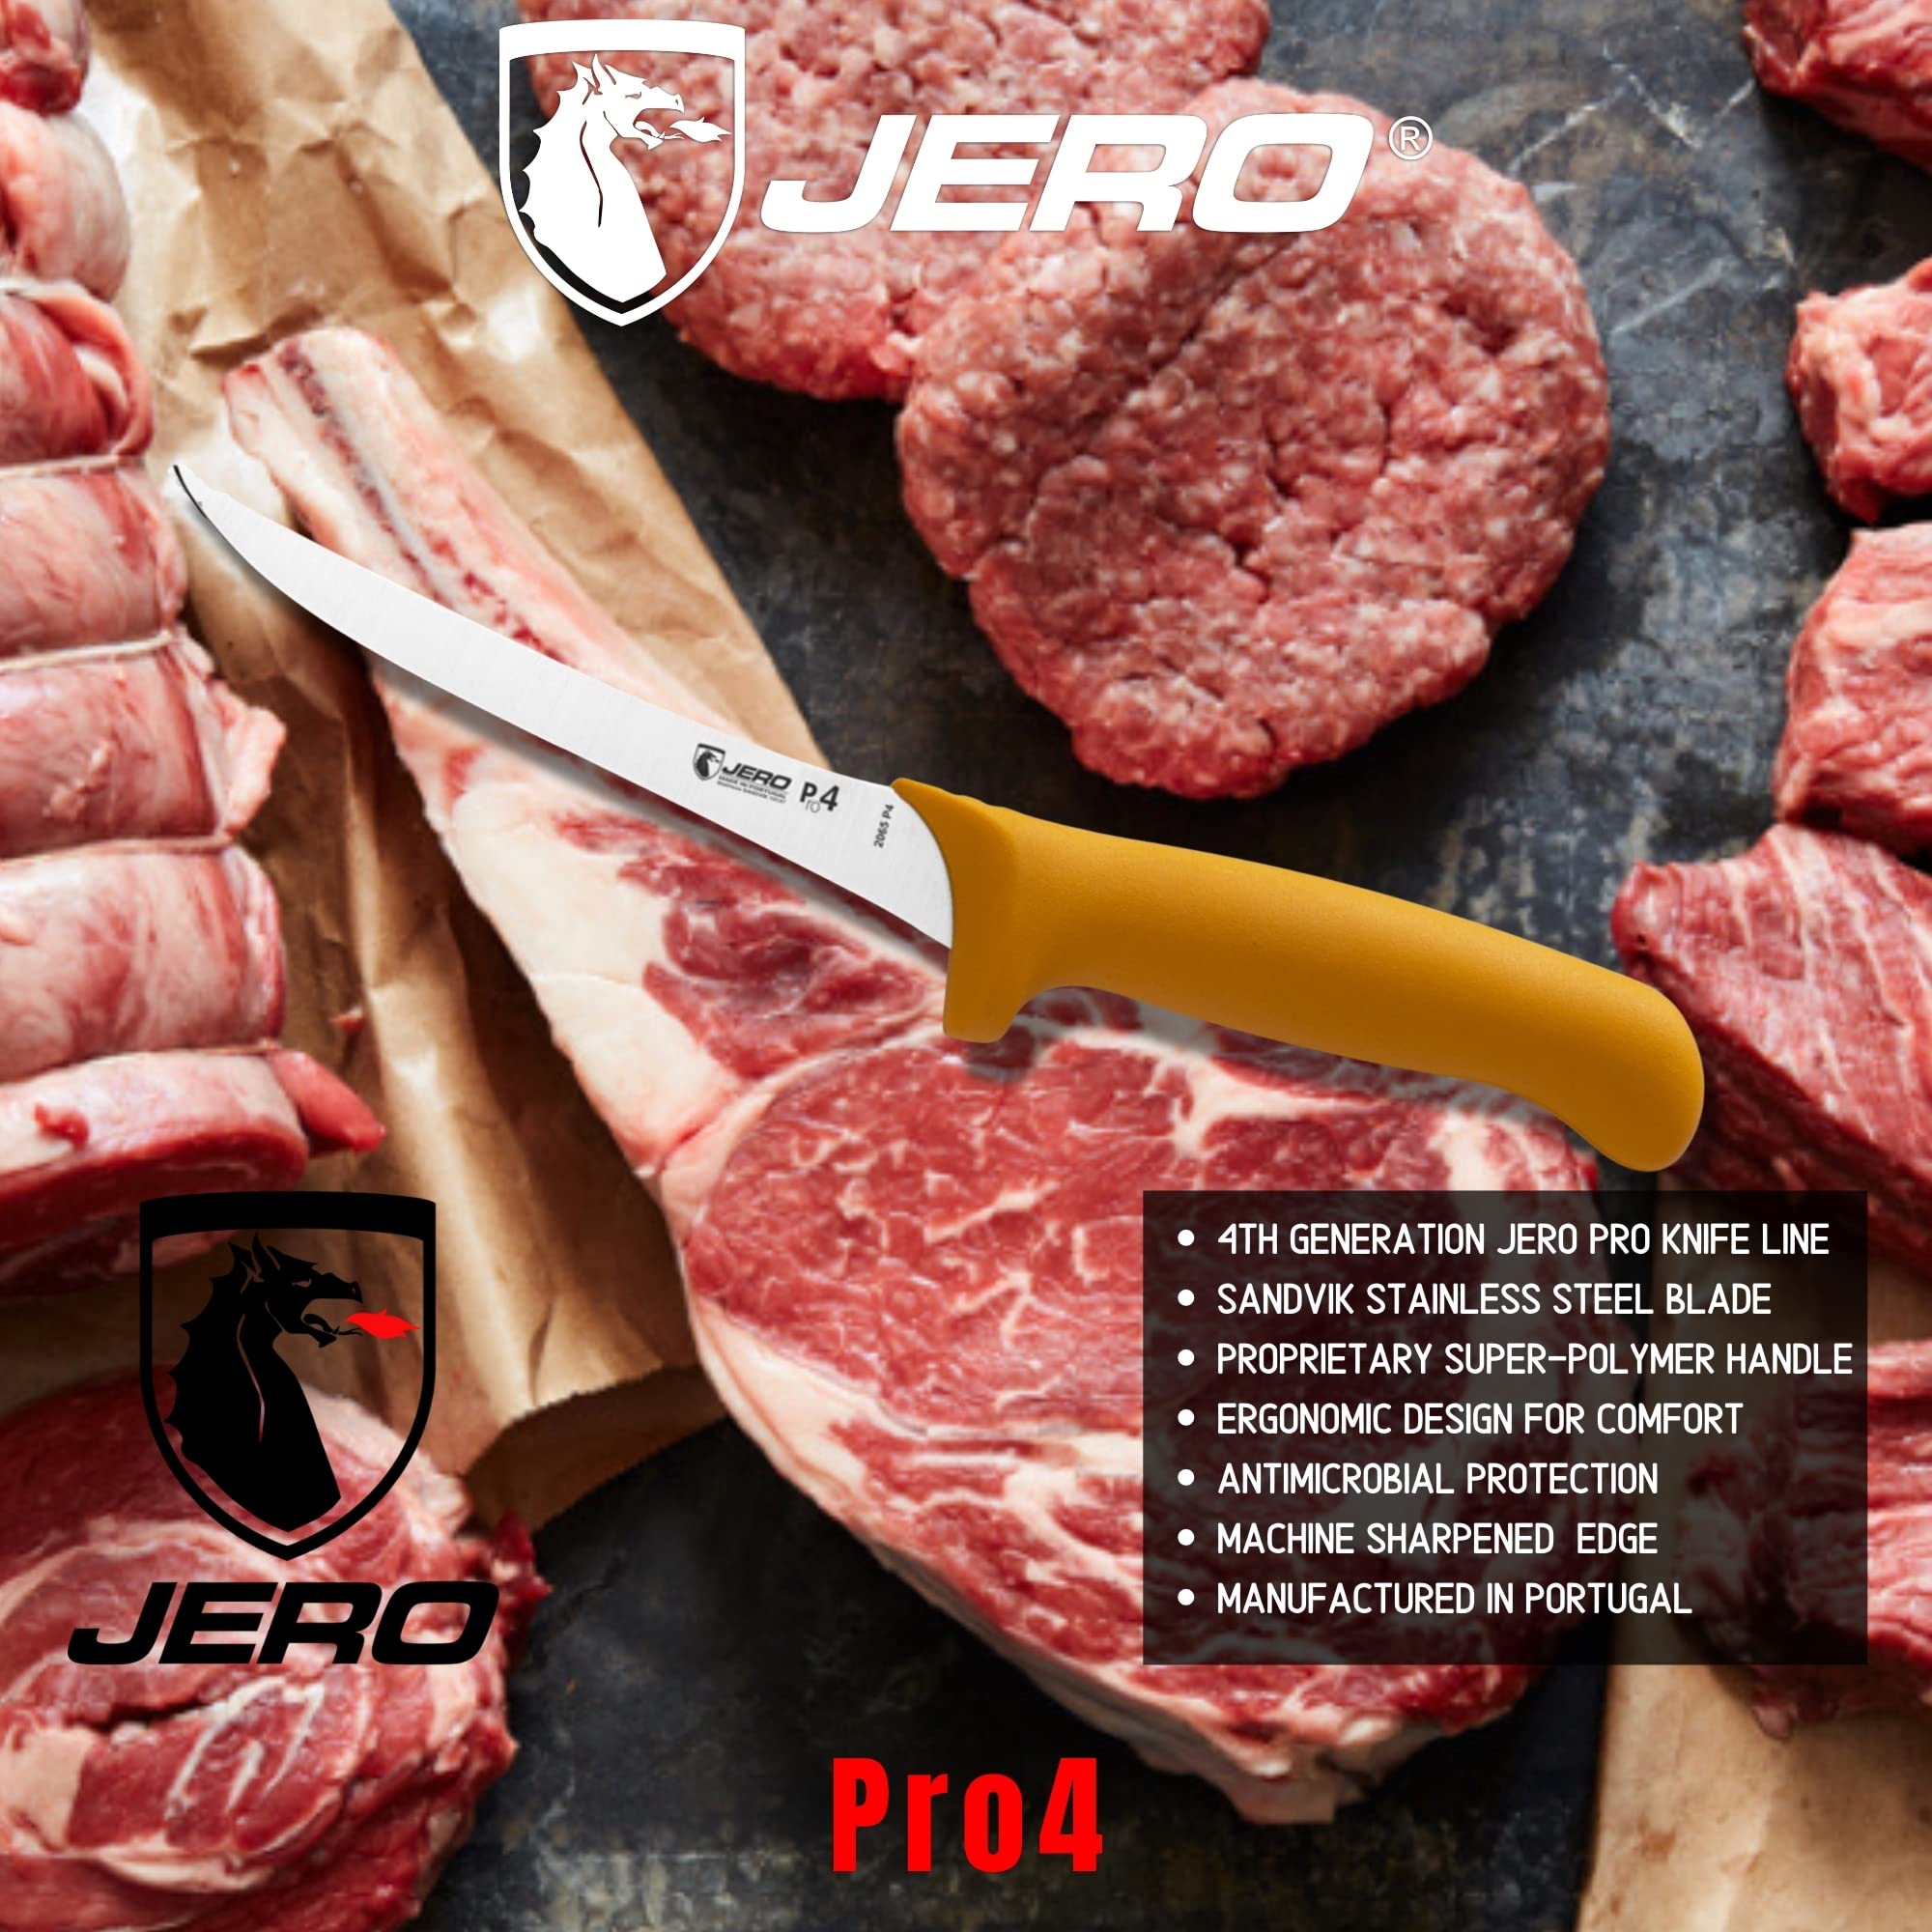 Jero Pro4 Series 6 Inch Curved Stiff Boning Knife - Professional Boning Knife - Sandvik High-Carbon Stainless Steel Blade - Ergogrip Super-Polymer Handle - Made In Portugal- Yellow Handle